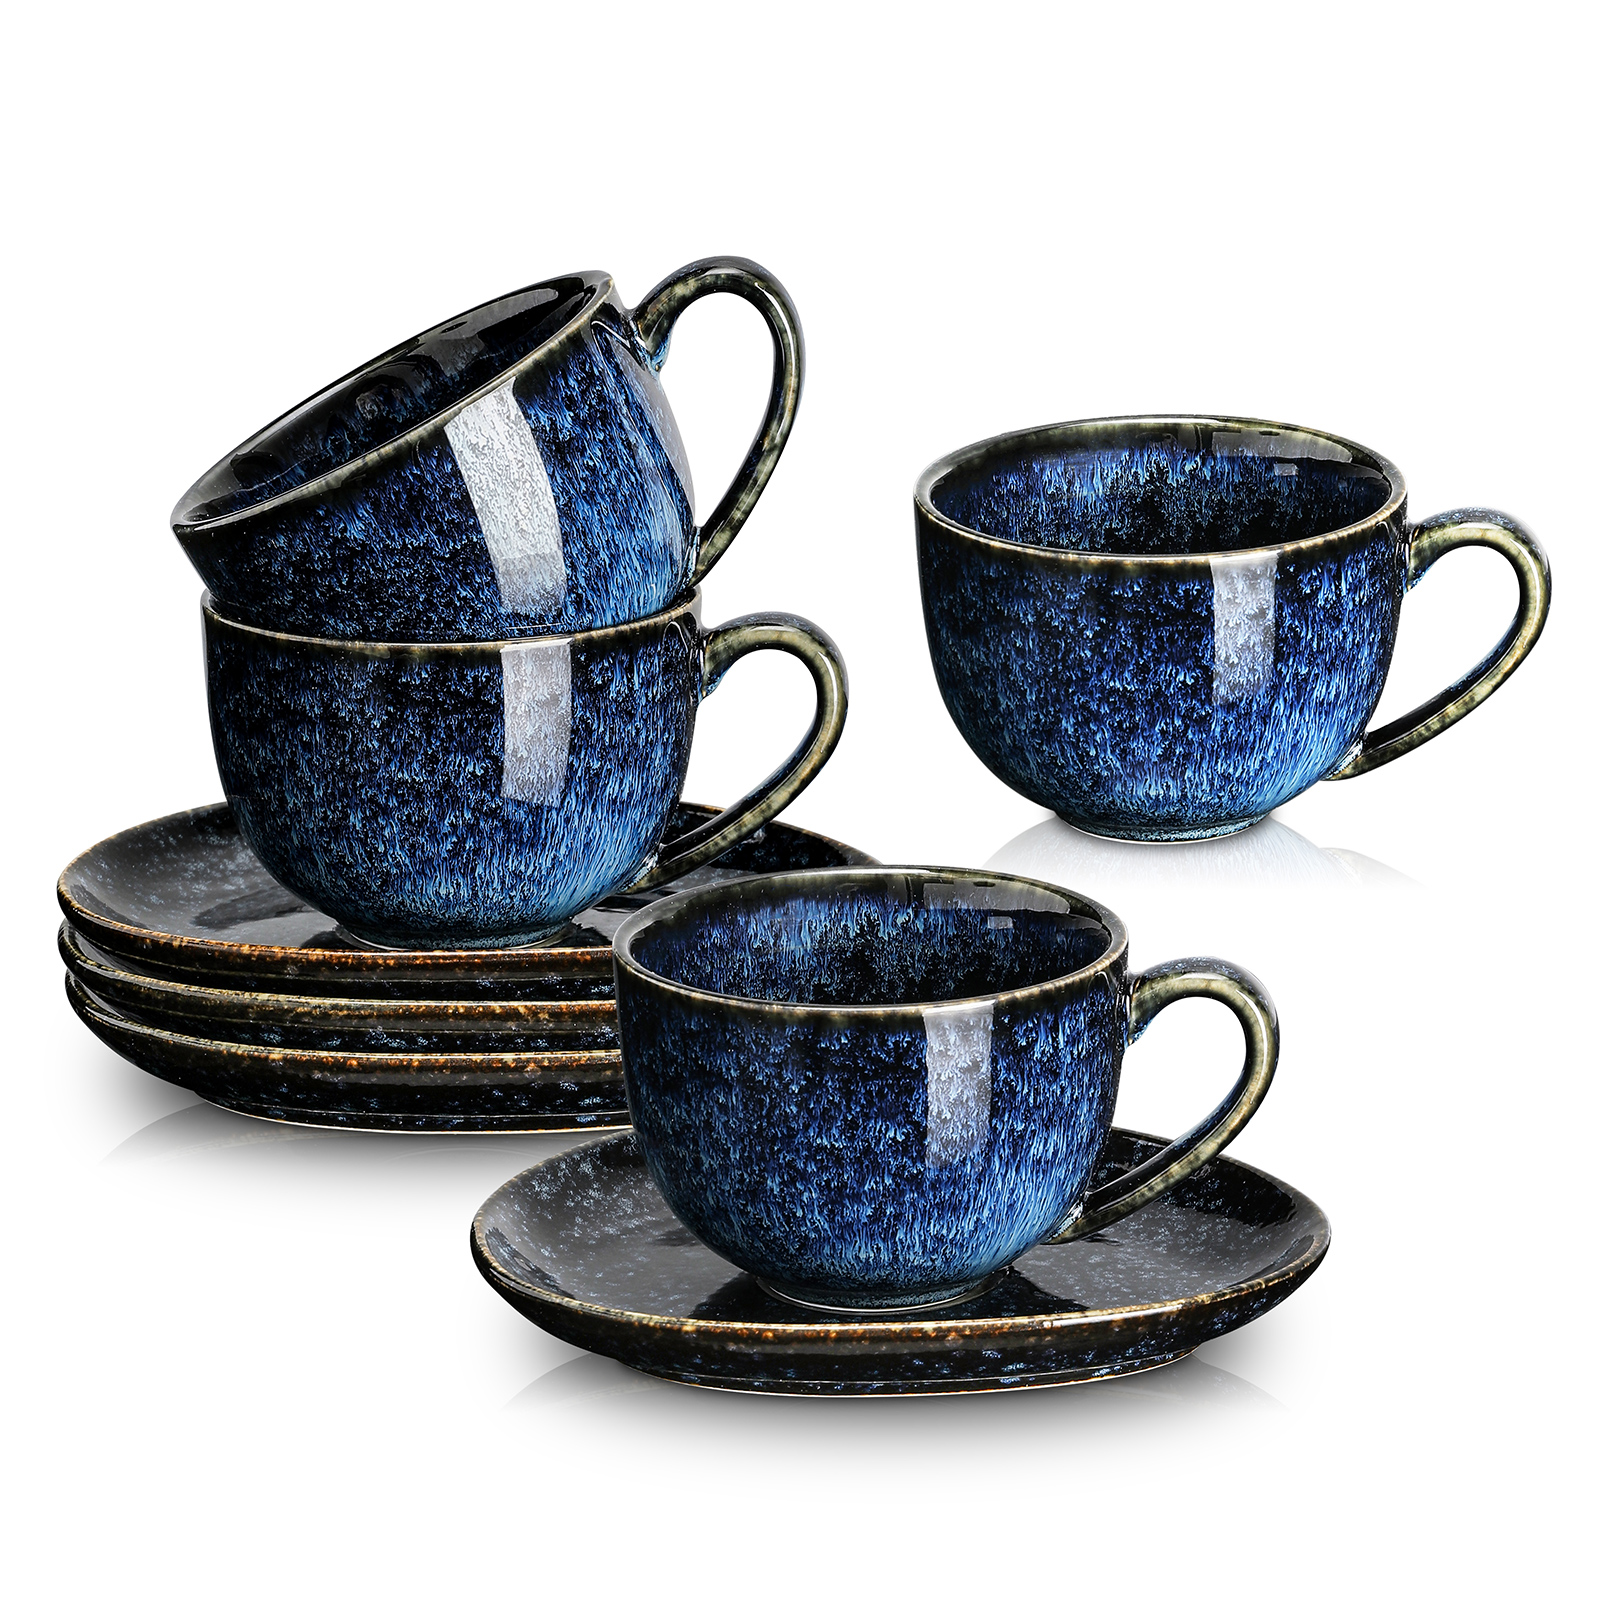 Cappuccino Mugs with Saucers Set of 4 - 8oz - Assorted Neutrals